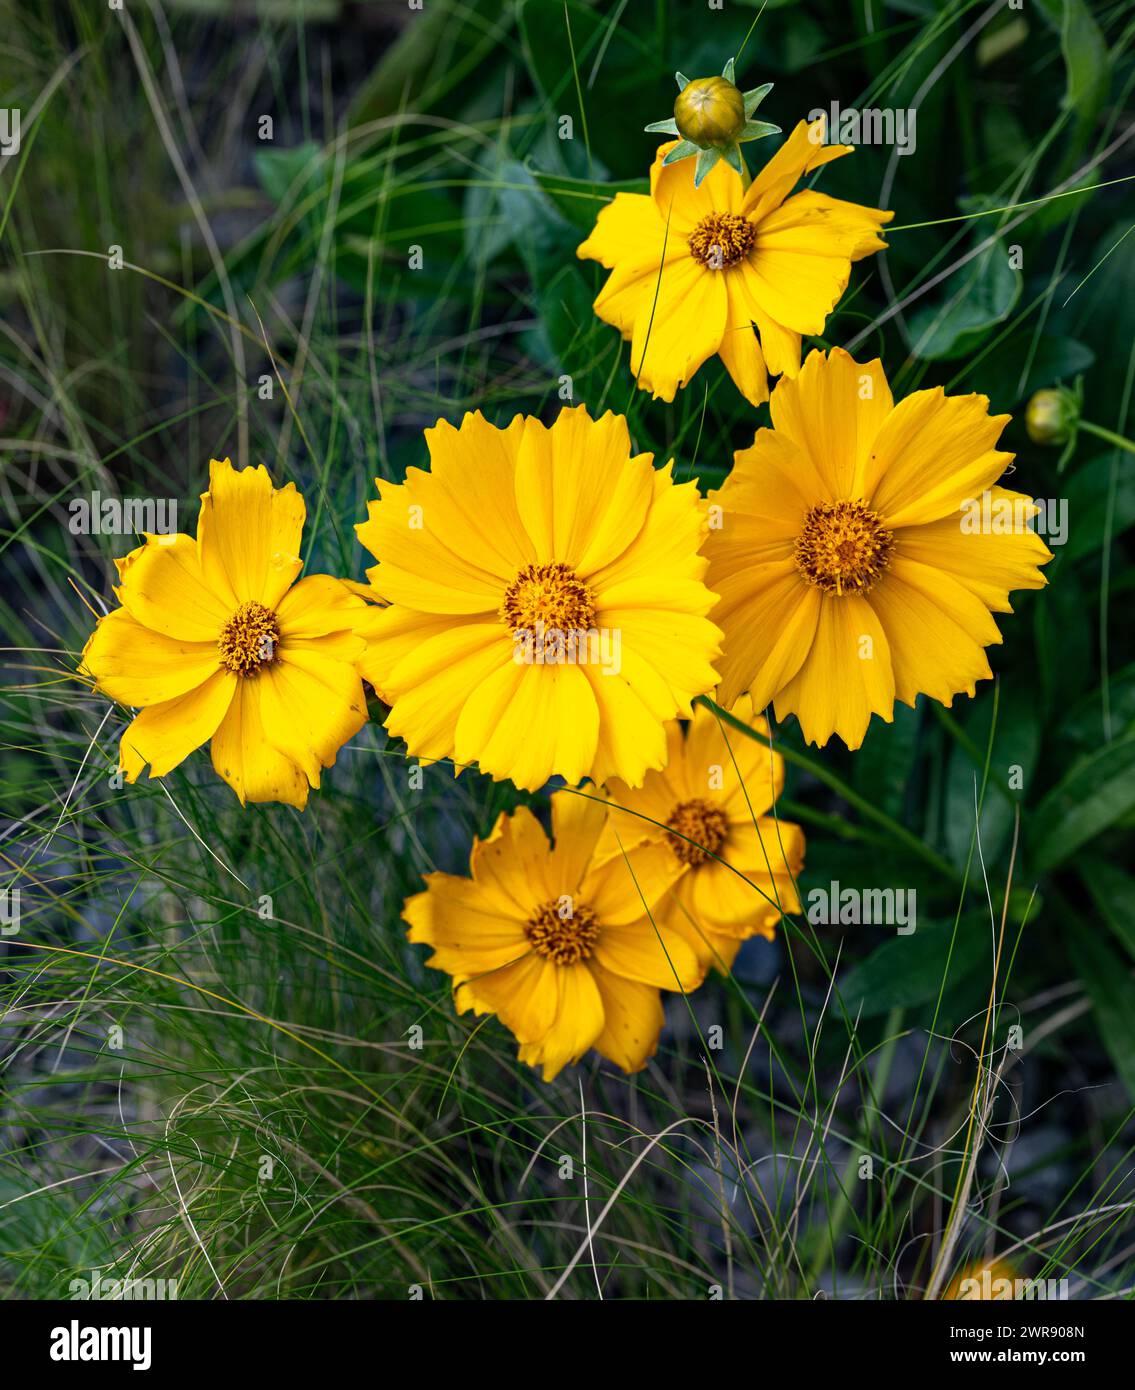 Coreopsis lanceolata, commonly known as lanceleaf coreopsis. It is native to the eastern and central parts of the United States and naturalized in Can Stock Photo